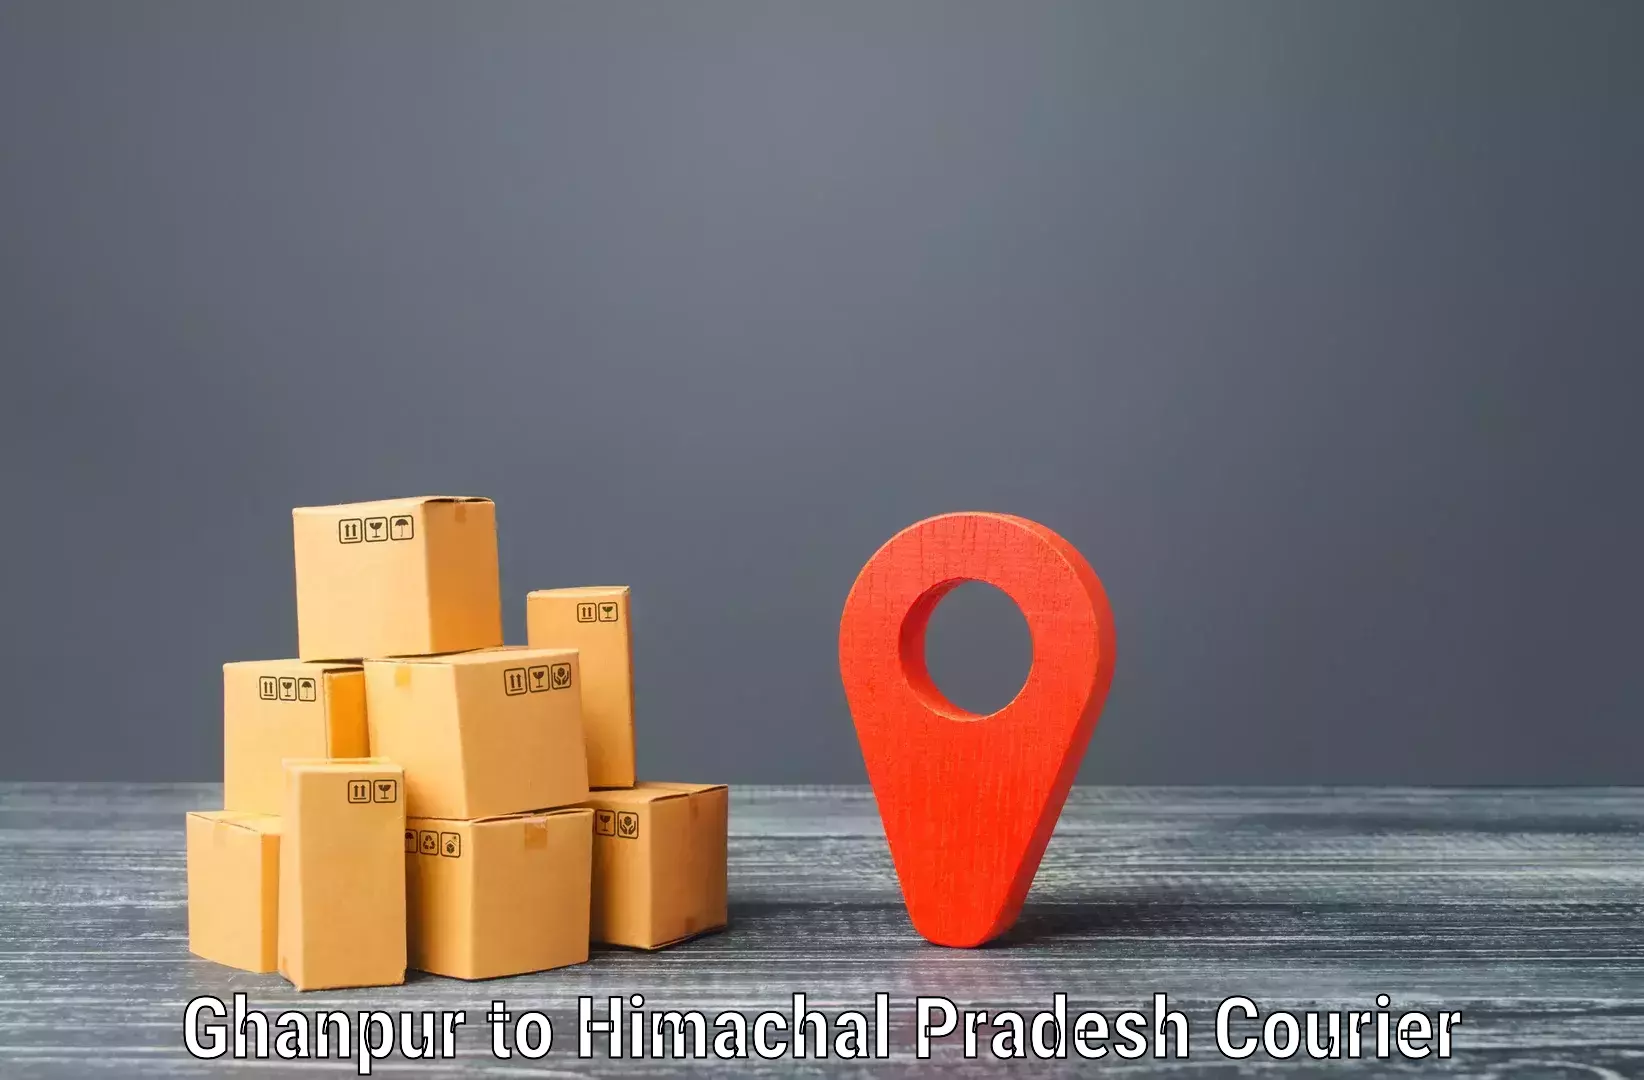 Nationwide shipping services Ghanpur to Nalagarh